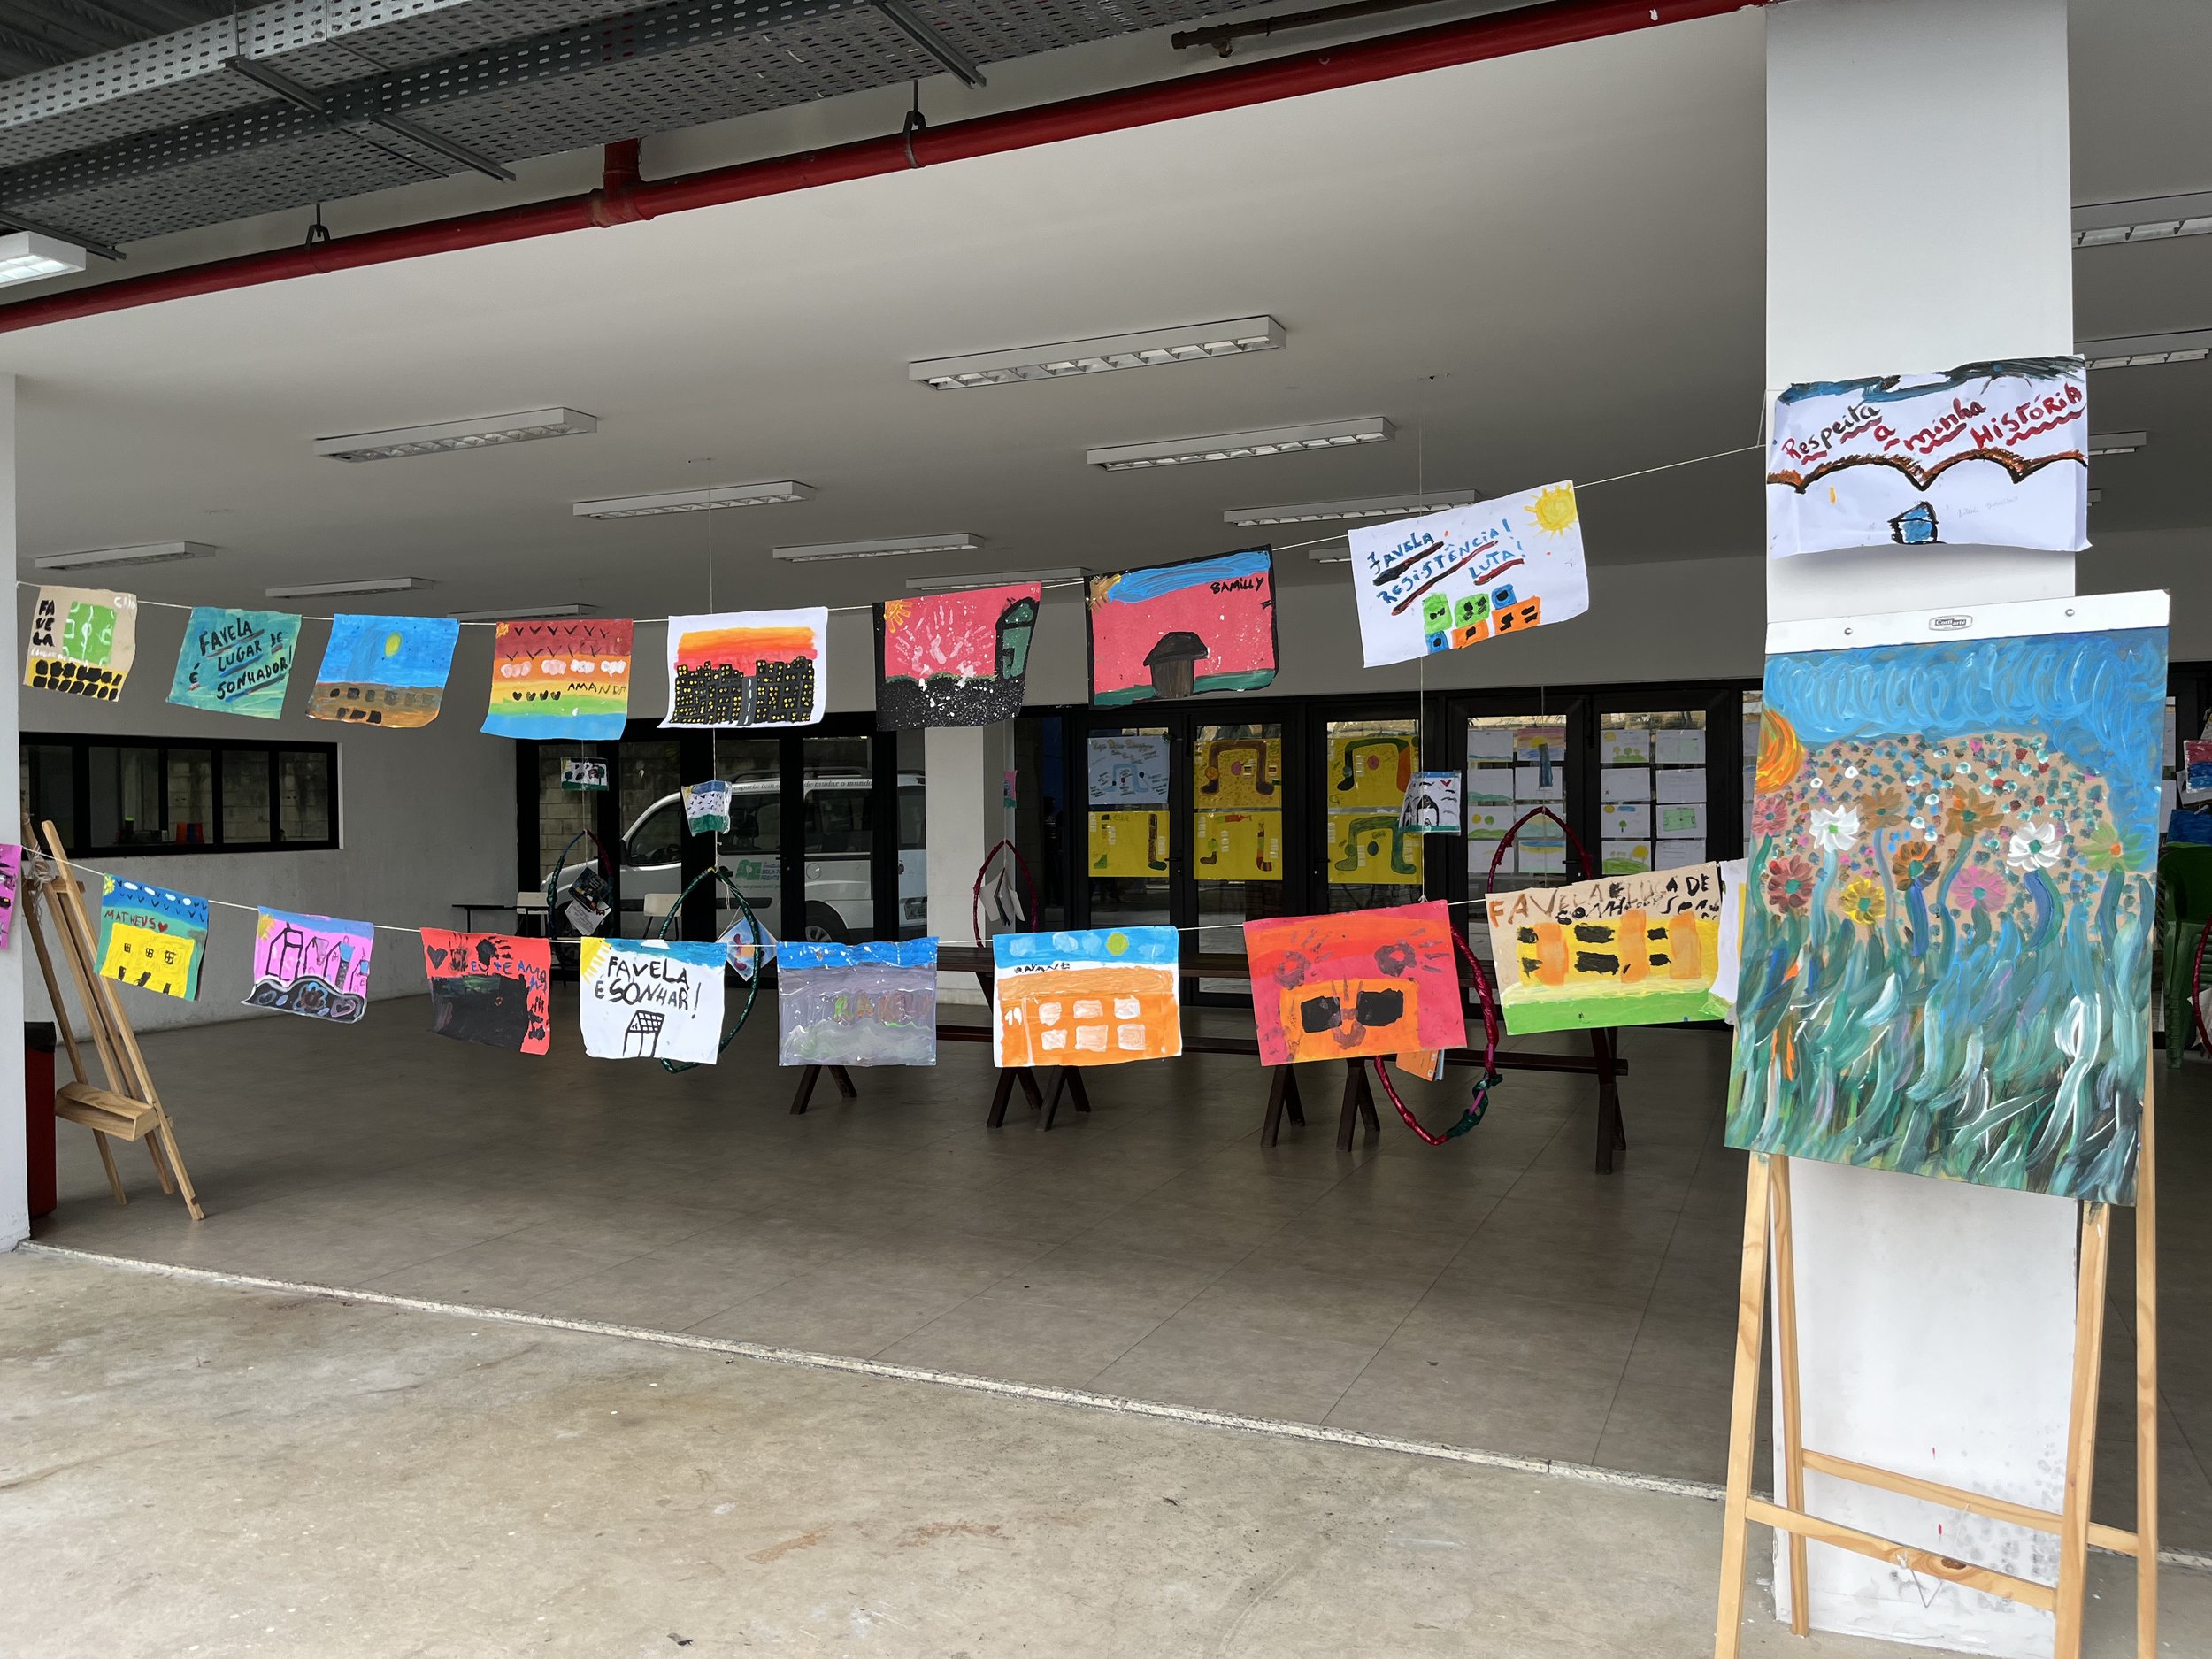  Some wonderful paintings done by the kids at Instituto Bola Pra Frente 